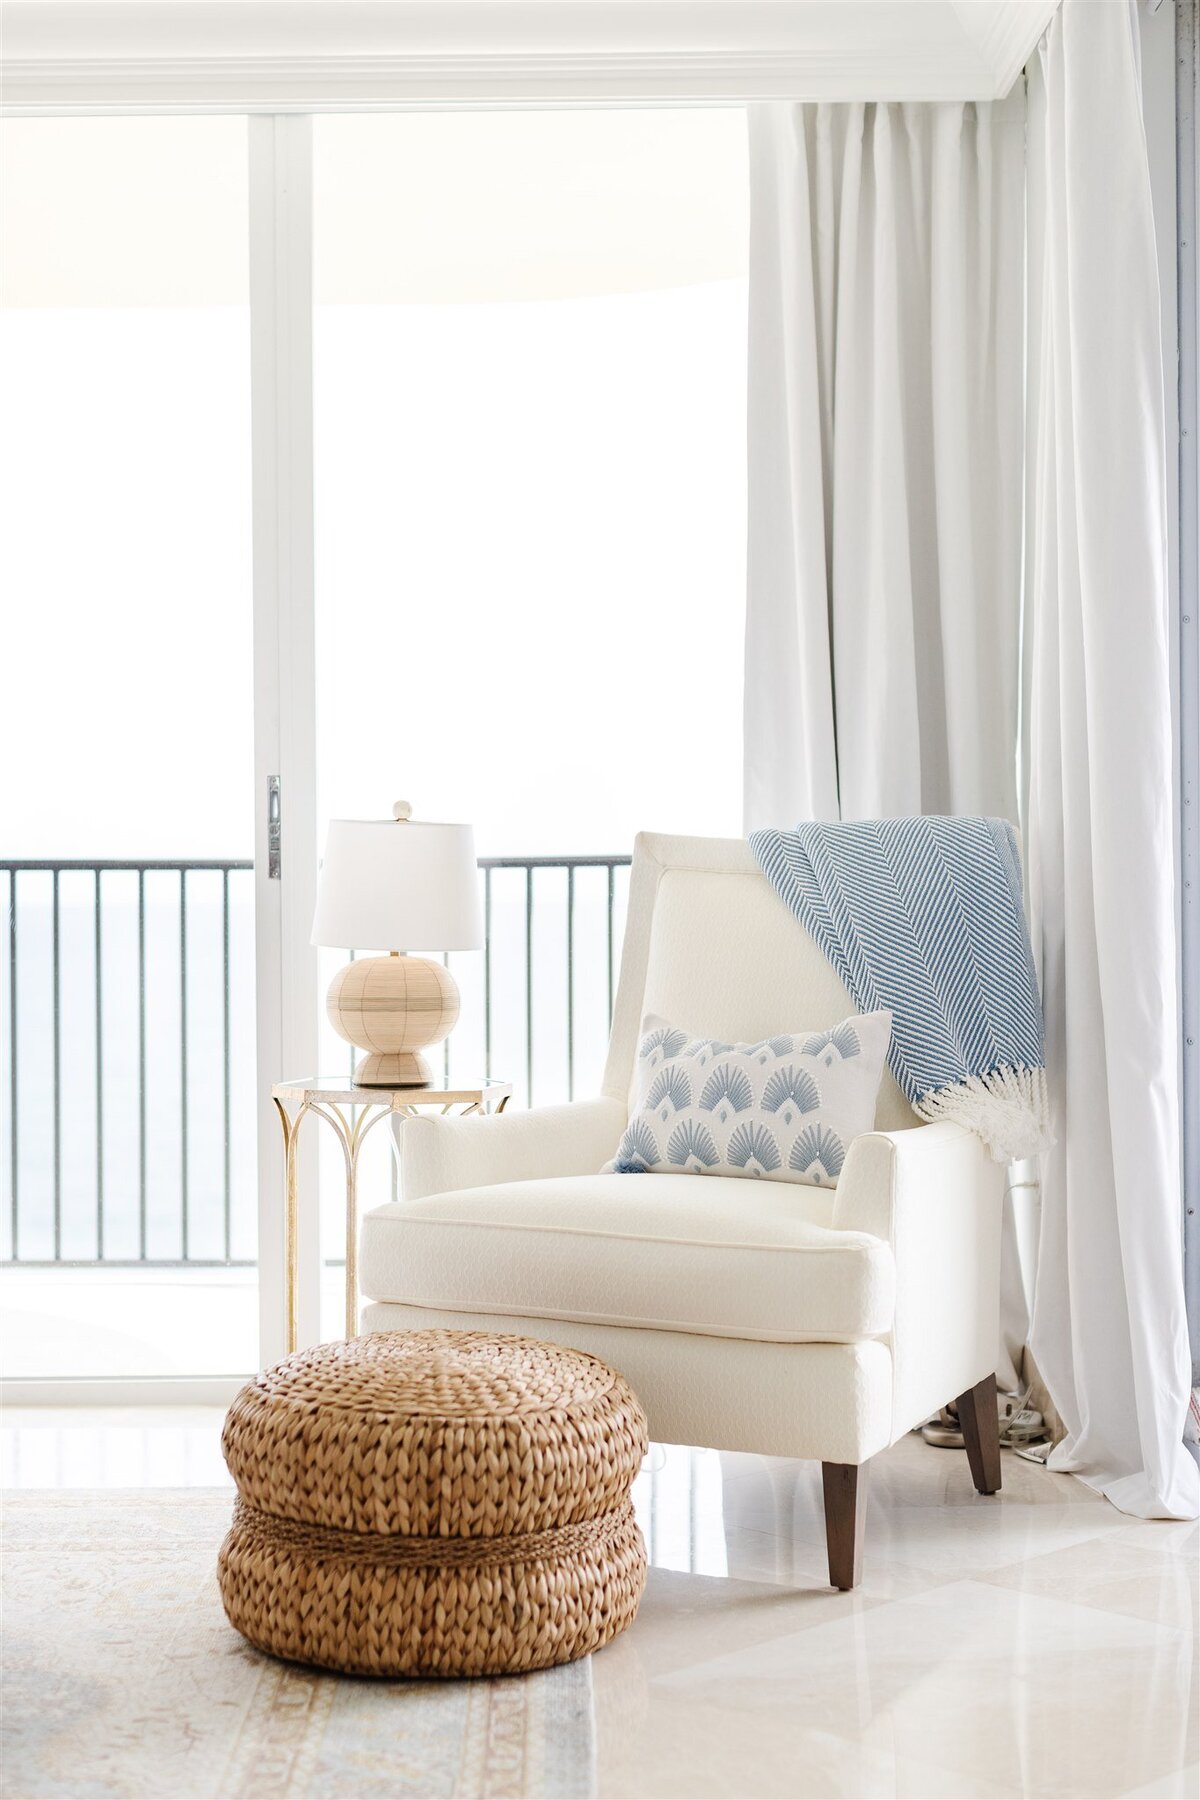 White chair with blue and wooden accents